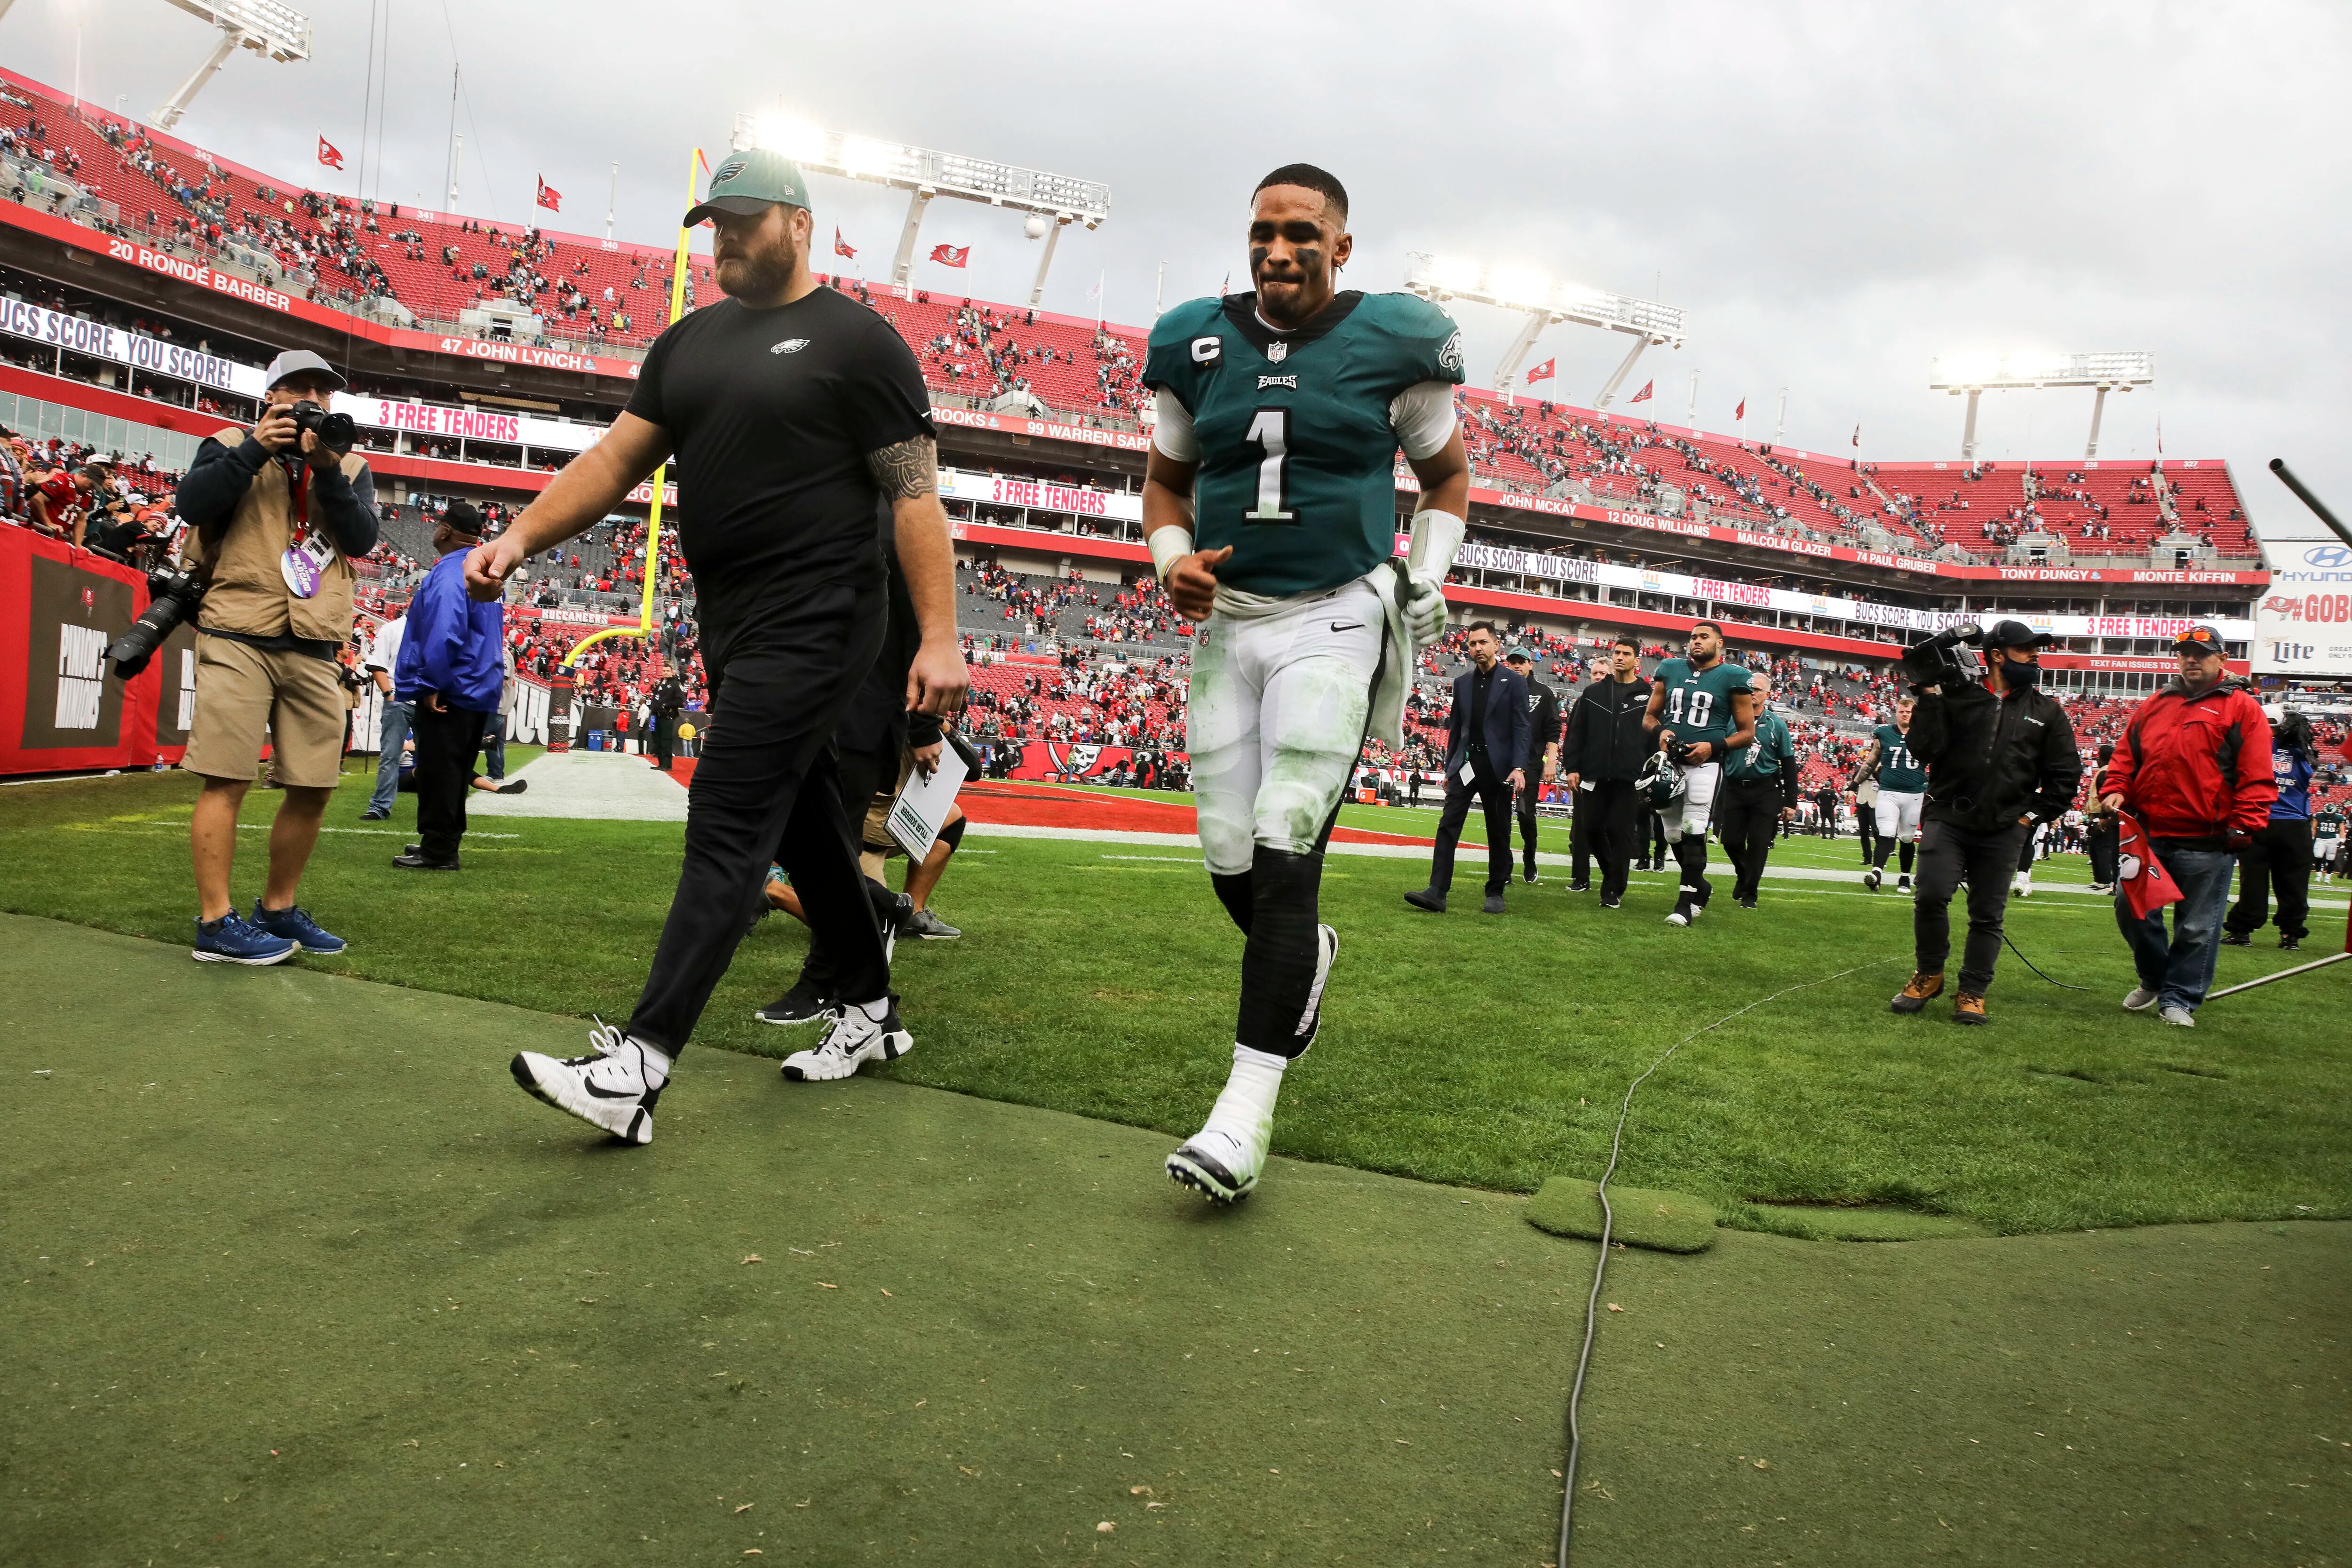 Philadelphia Eagles at Tampa Bay Buccaneers Wild Card Playoff game